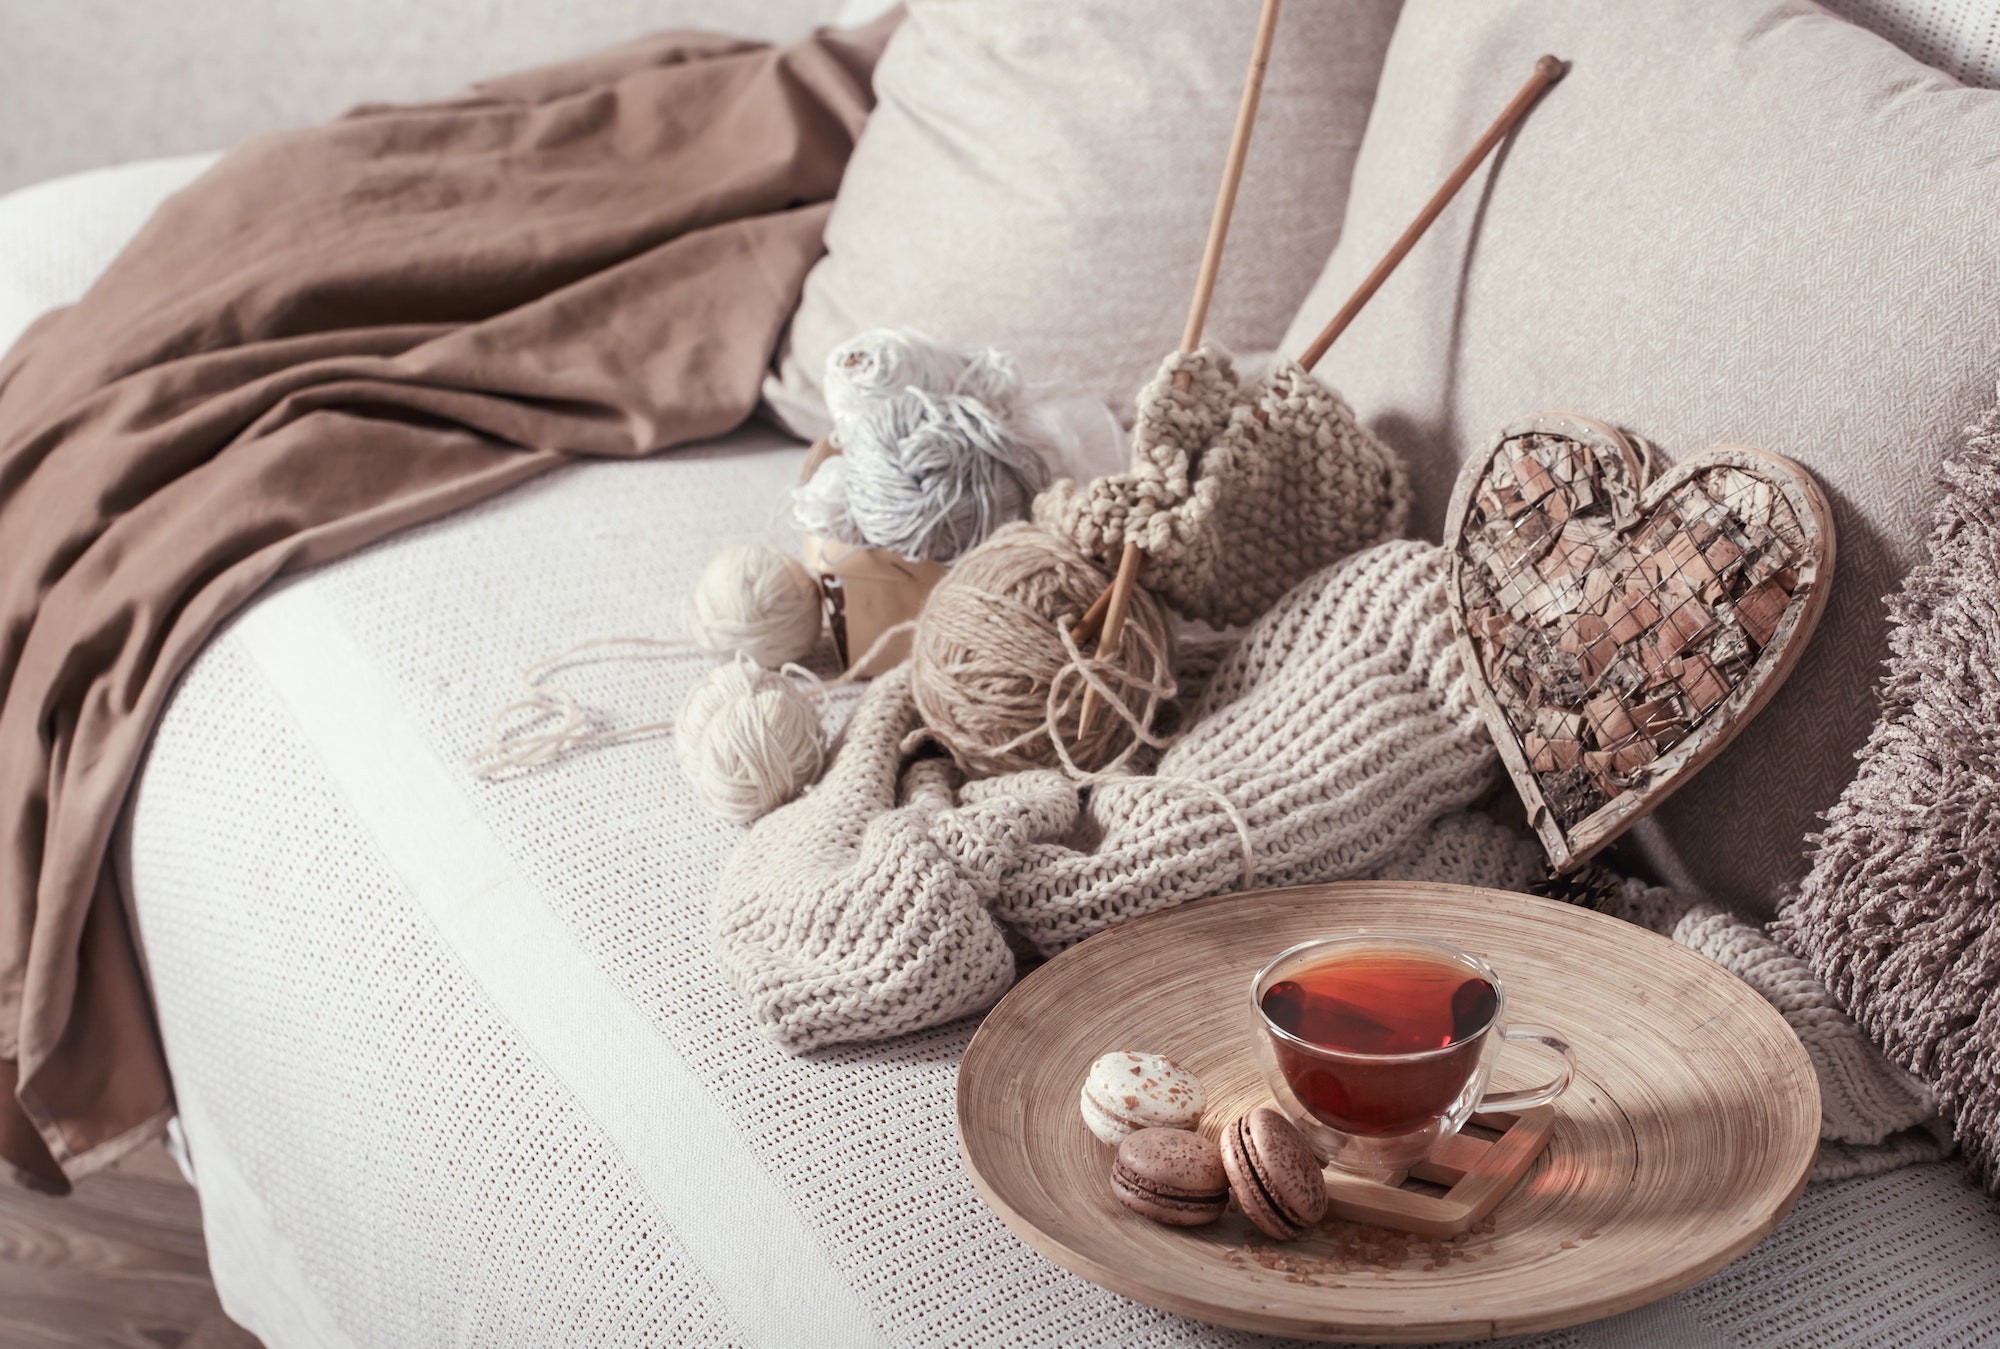 vintage knitting needles and yarn with a cup of tea